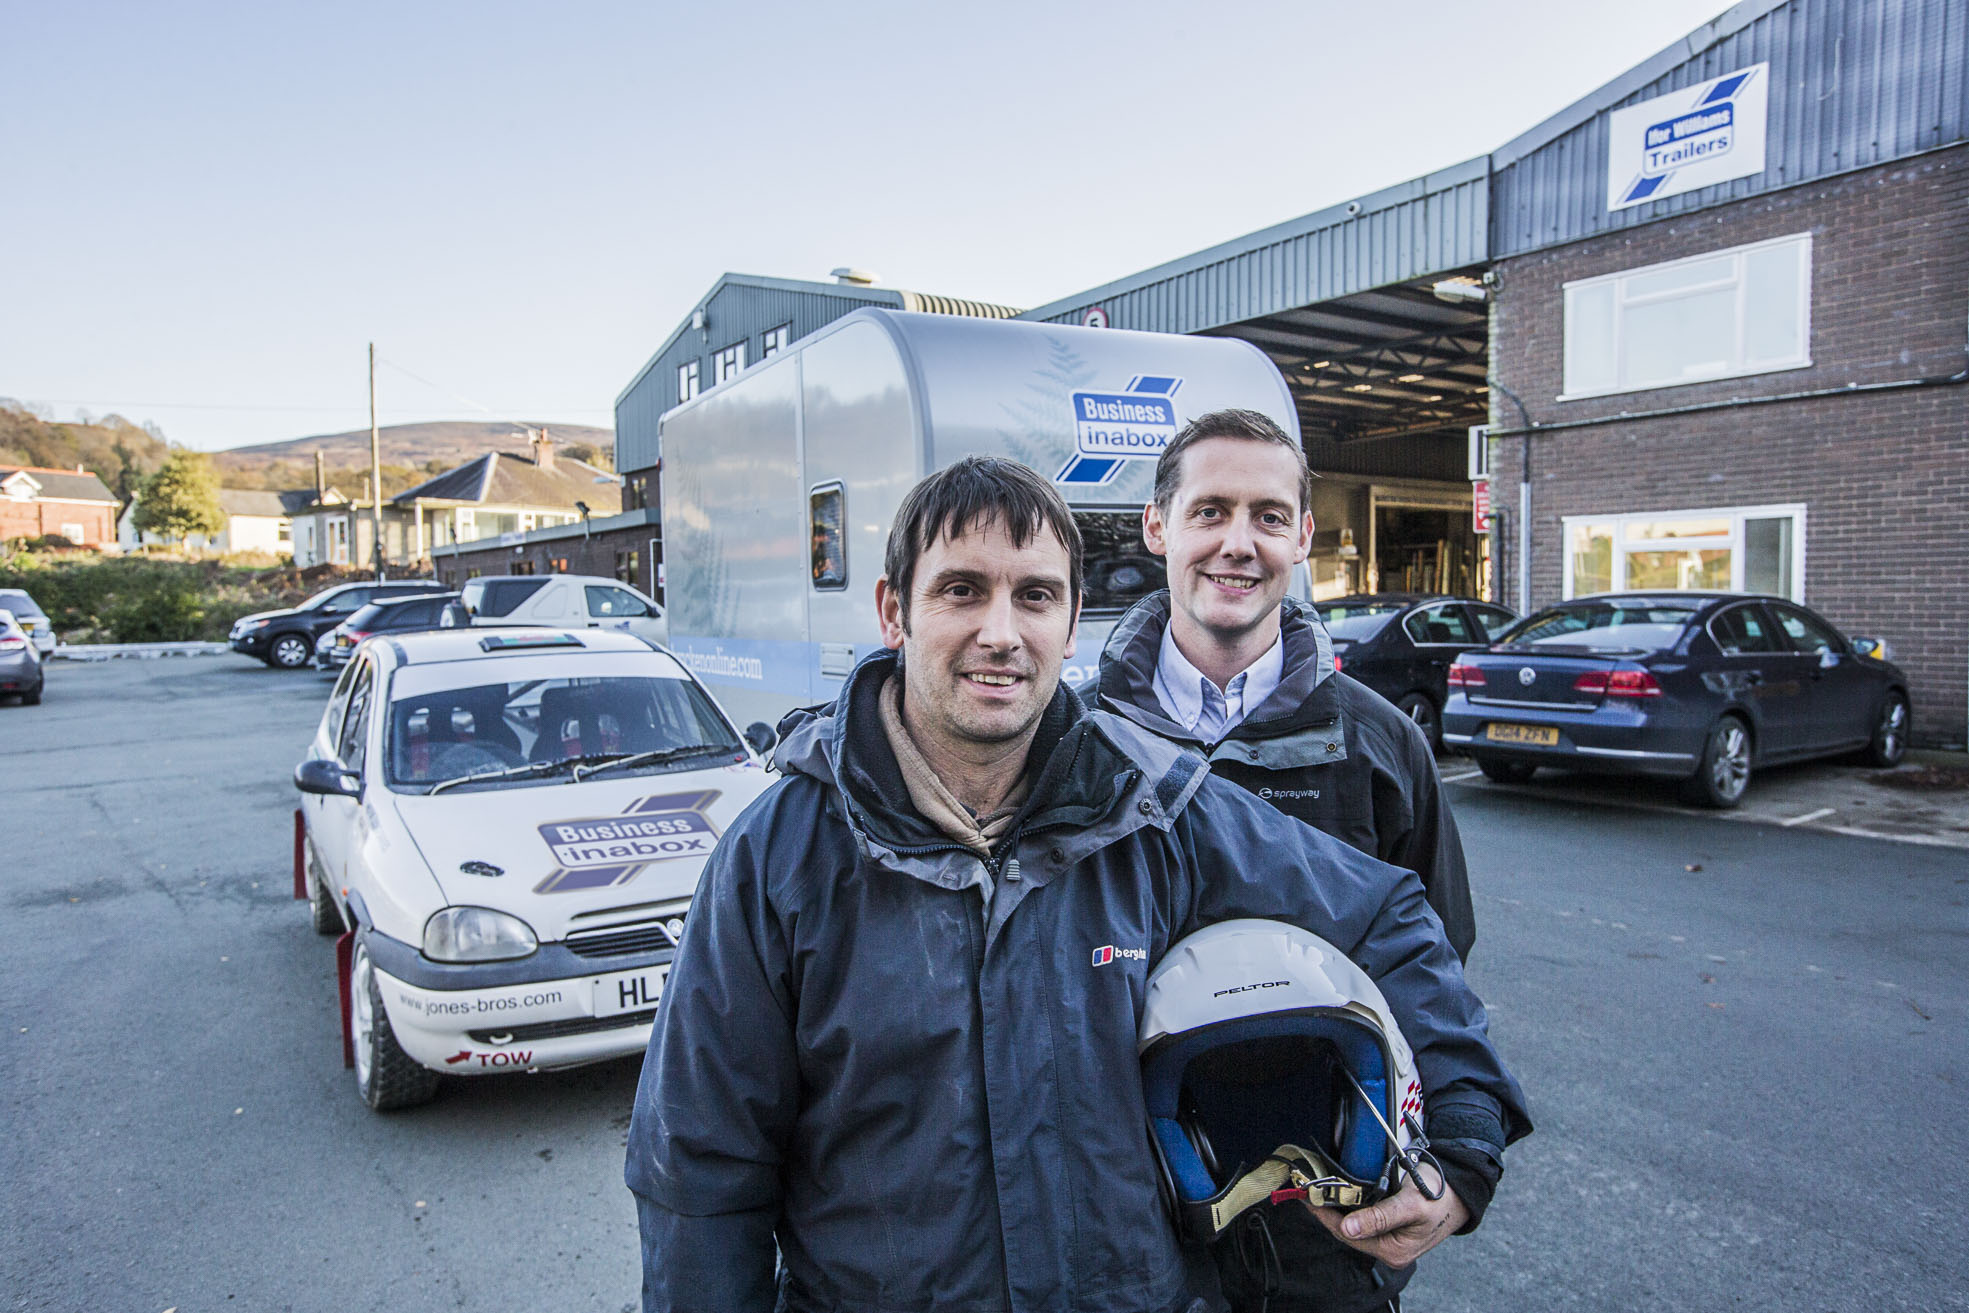 Trailer firm comes to the aid of Wales Rally GB duo